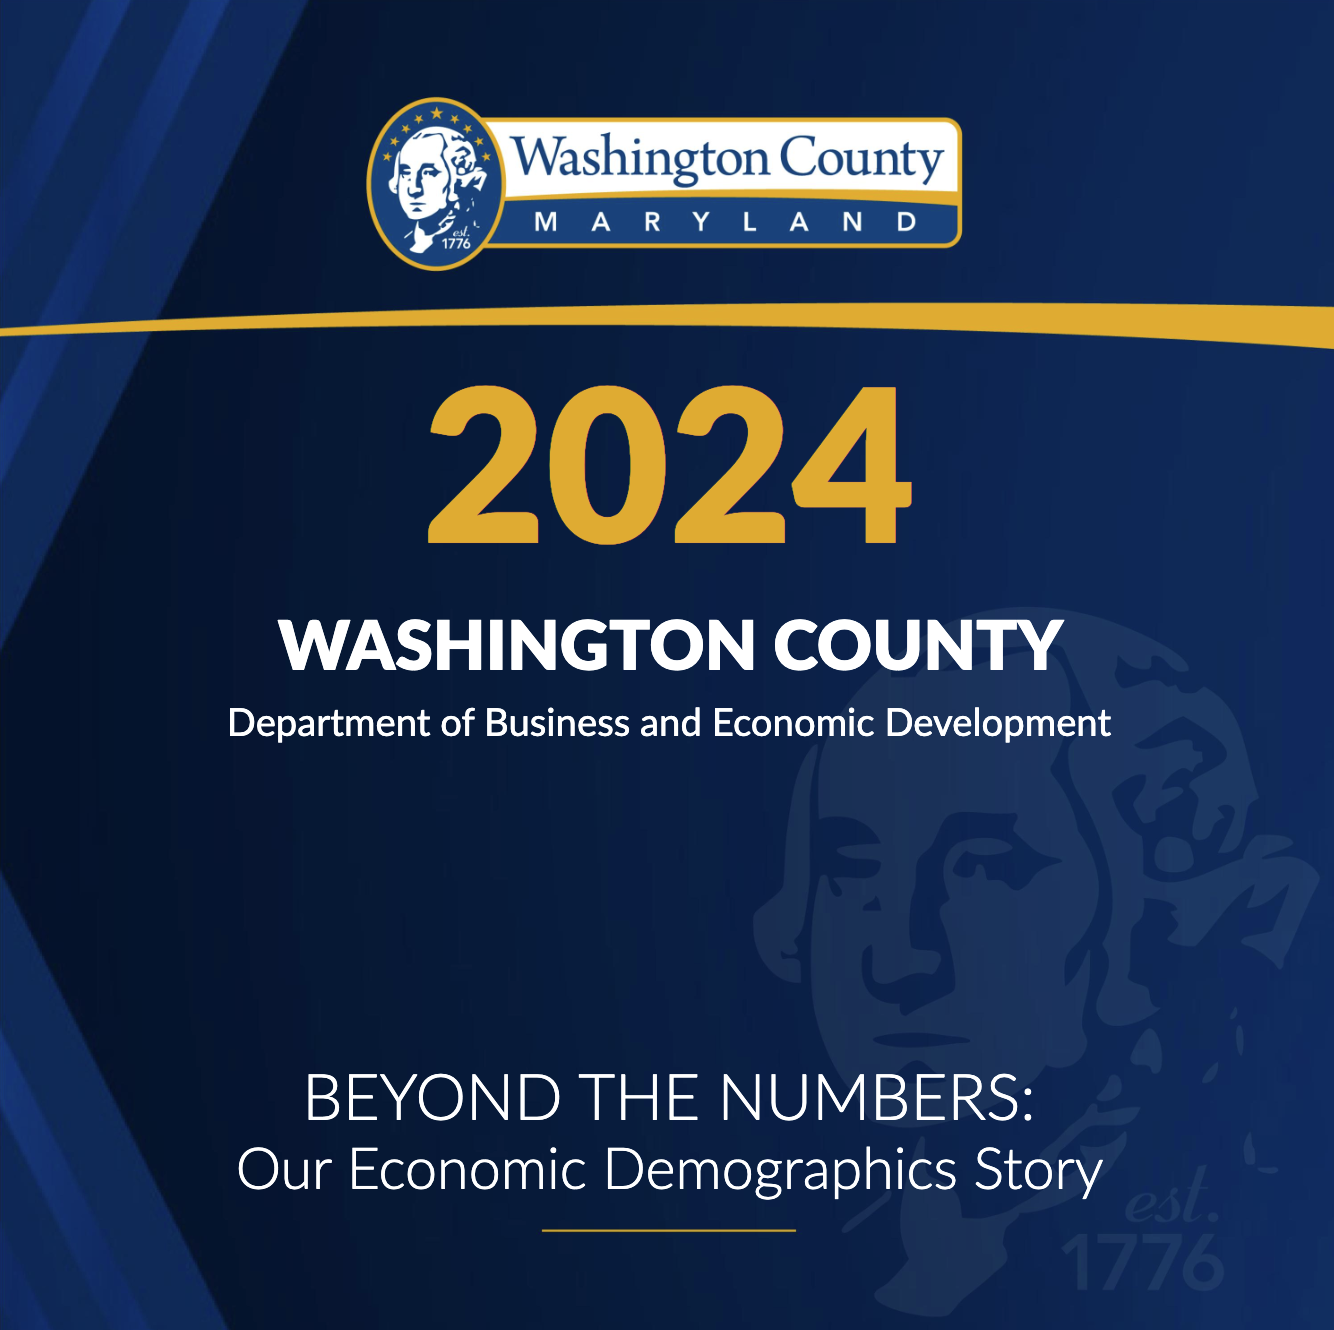 New Publication “Beyond The Numbers: Our Economic Demographics Story” Revealed by Washington County Department of Business and Economic Development